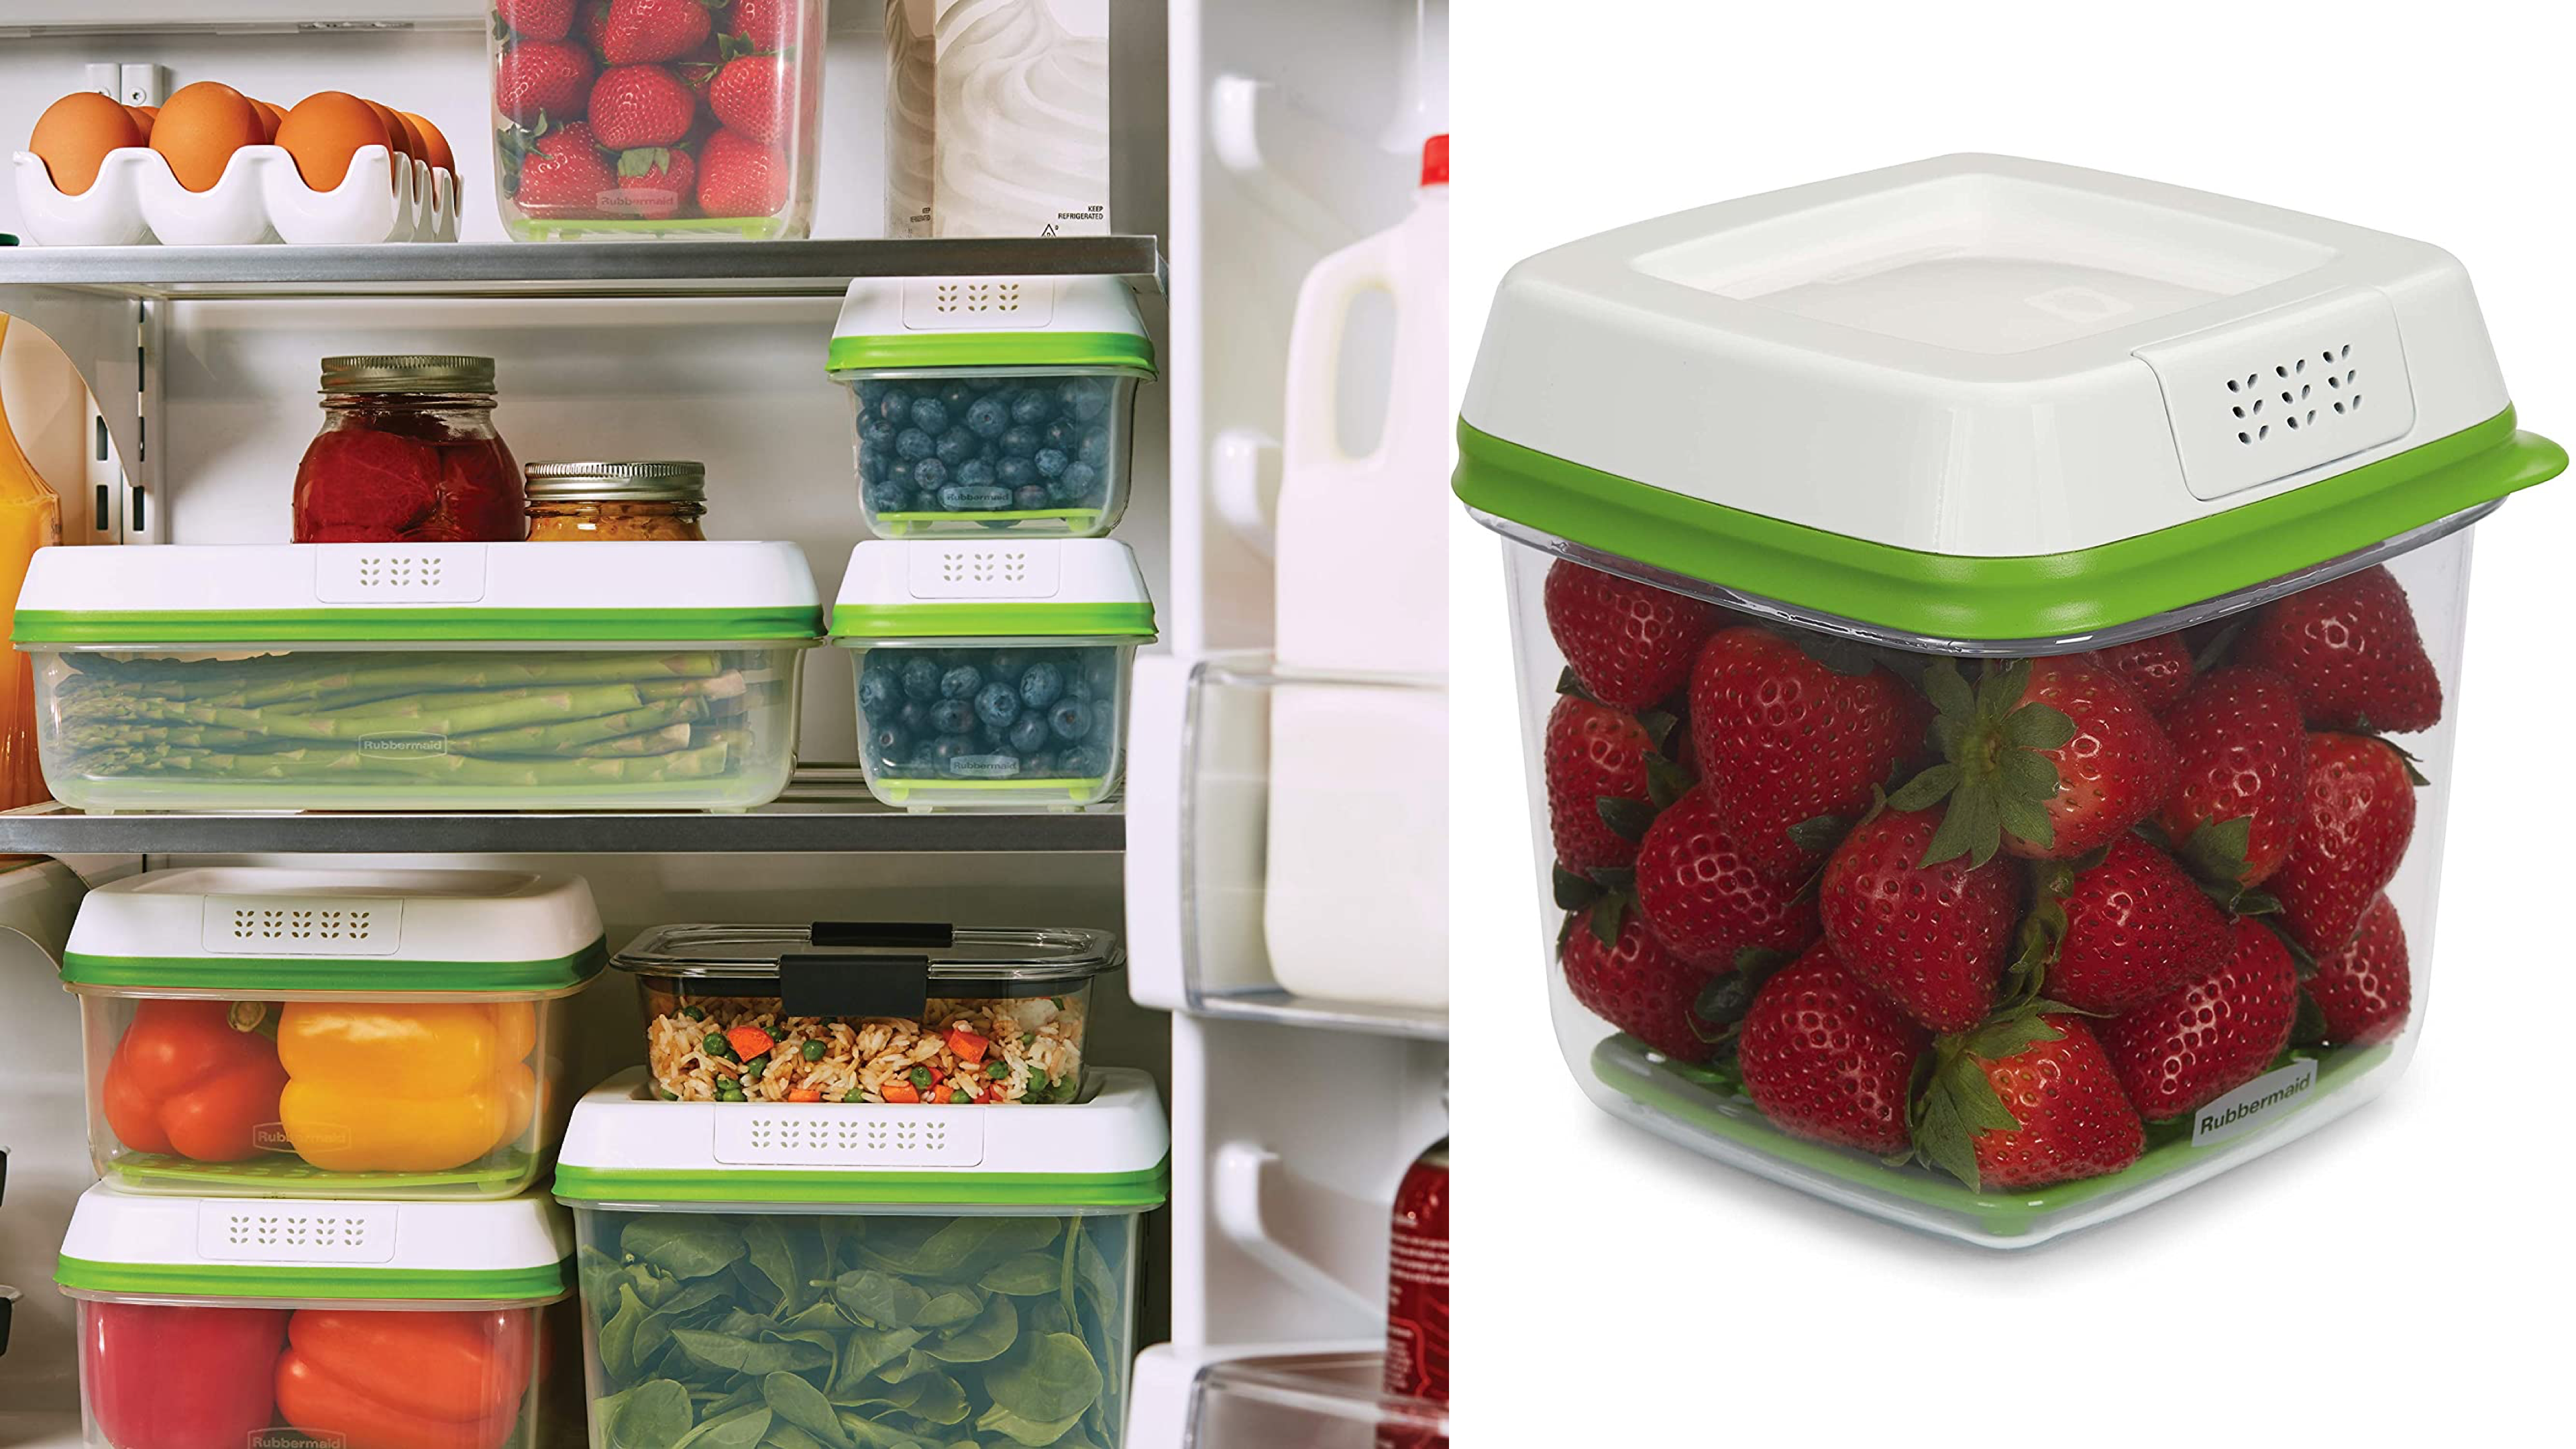 produce saving containers that help regulate air flow to keep produce fresher for longer